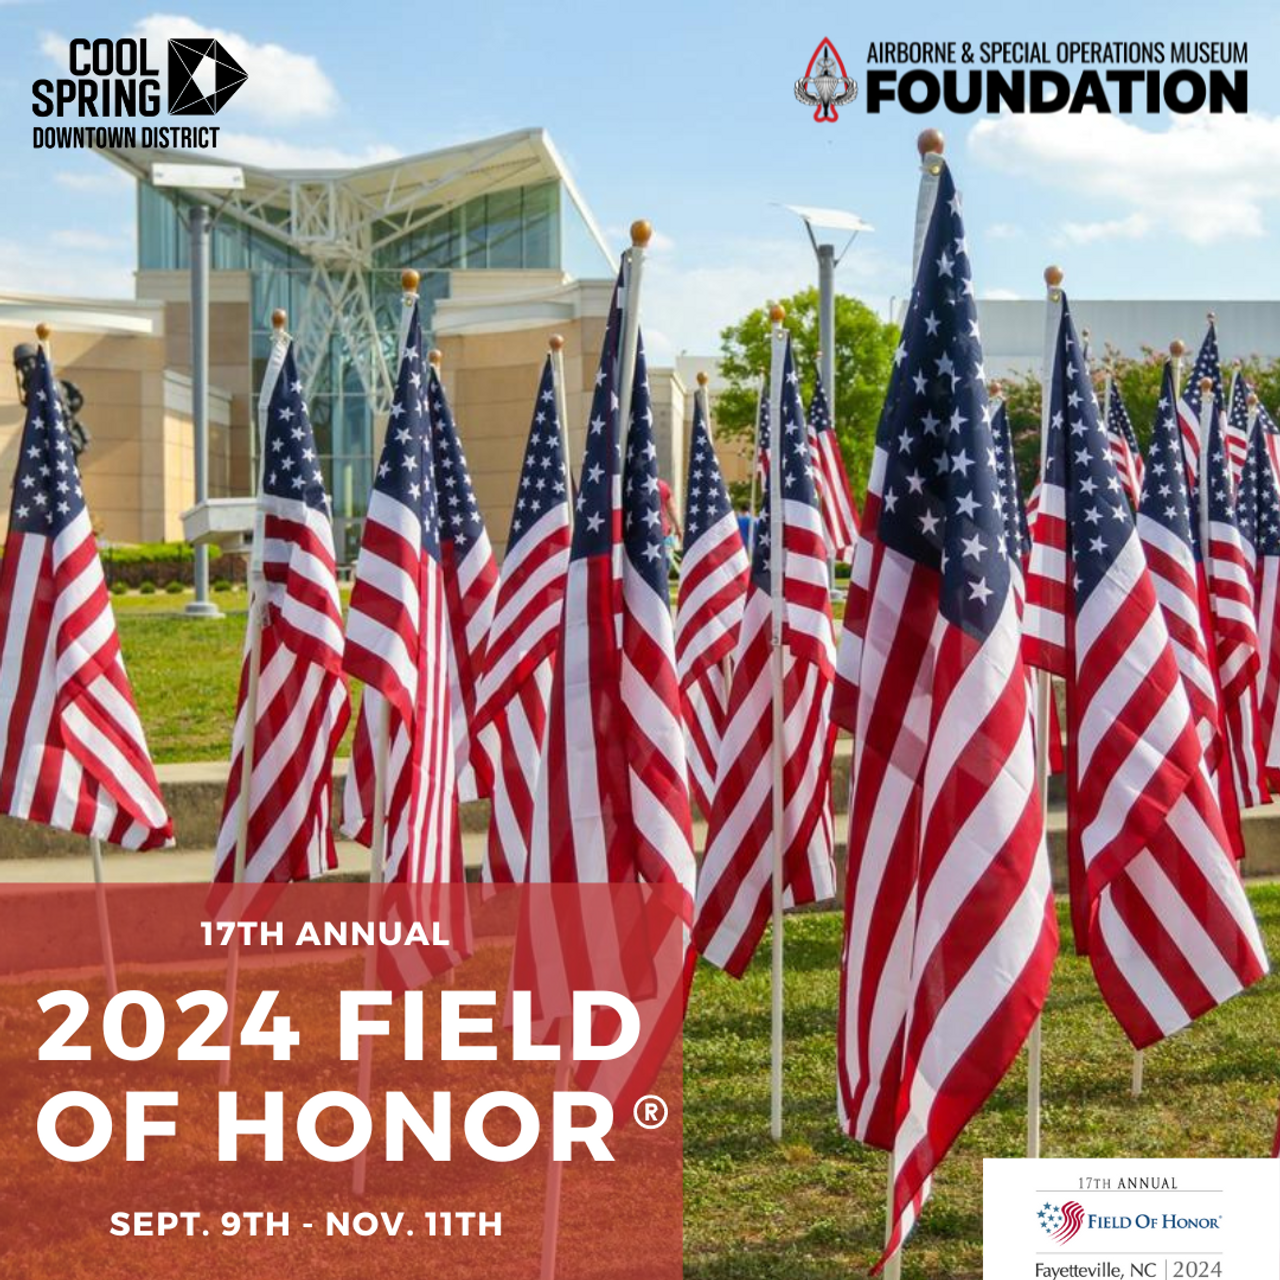 Field of Honor 2024 Airborne & Special Operations Museum Store